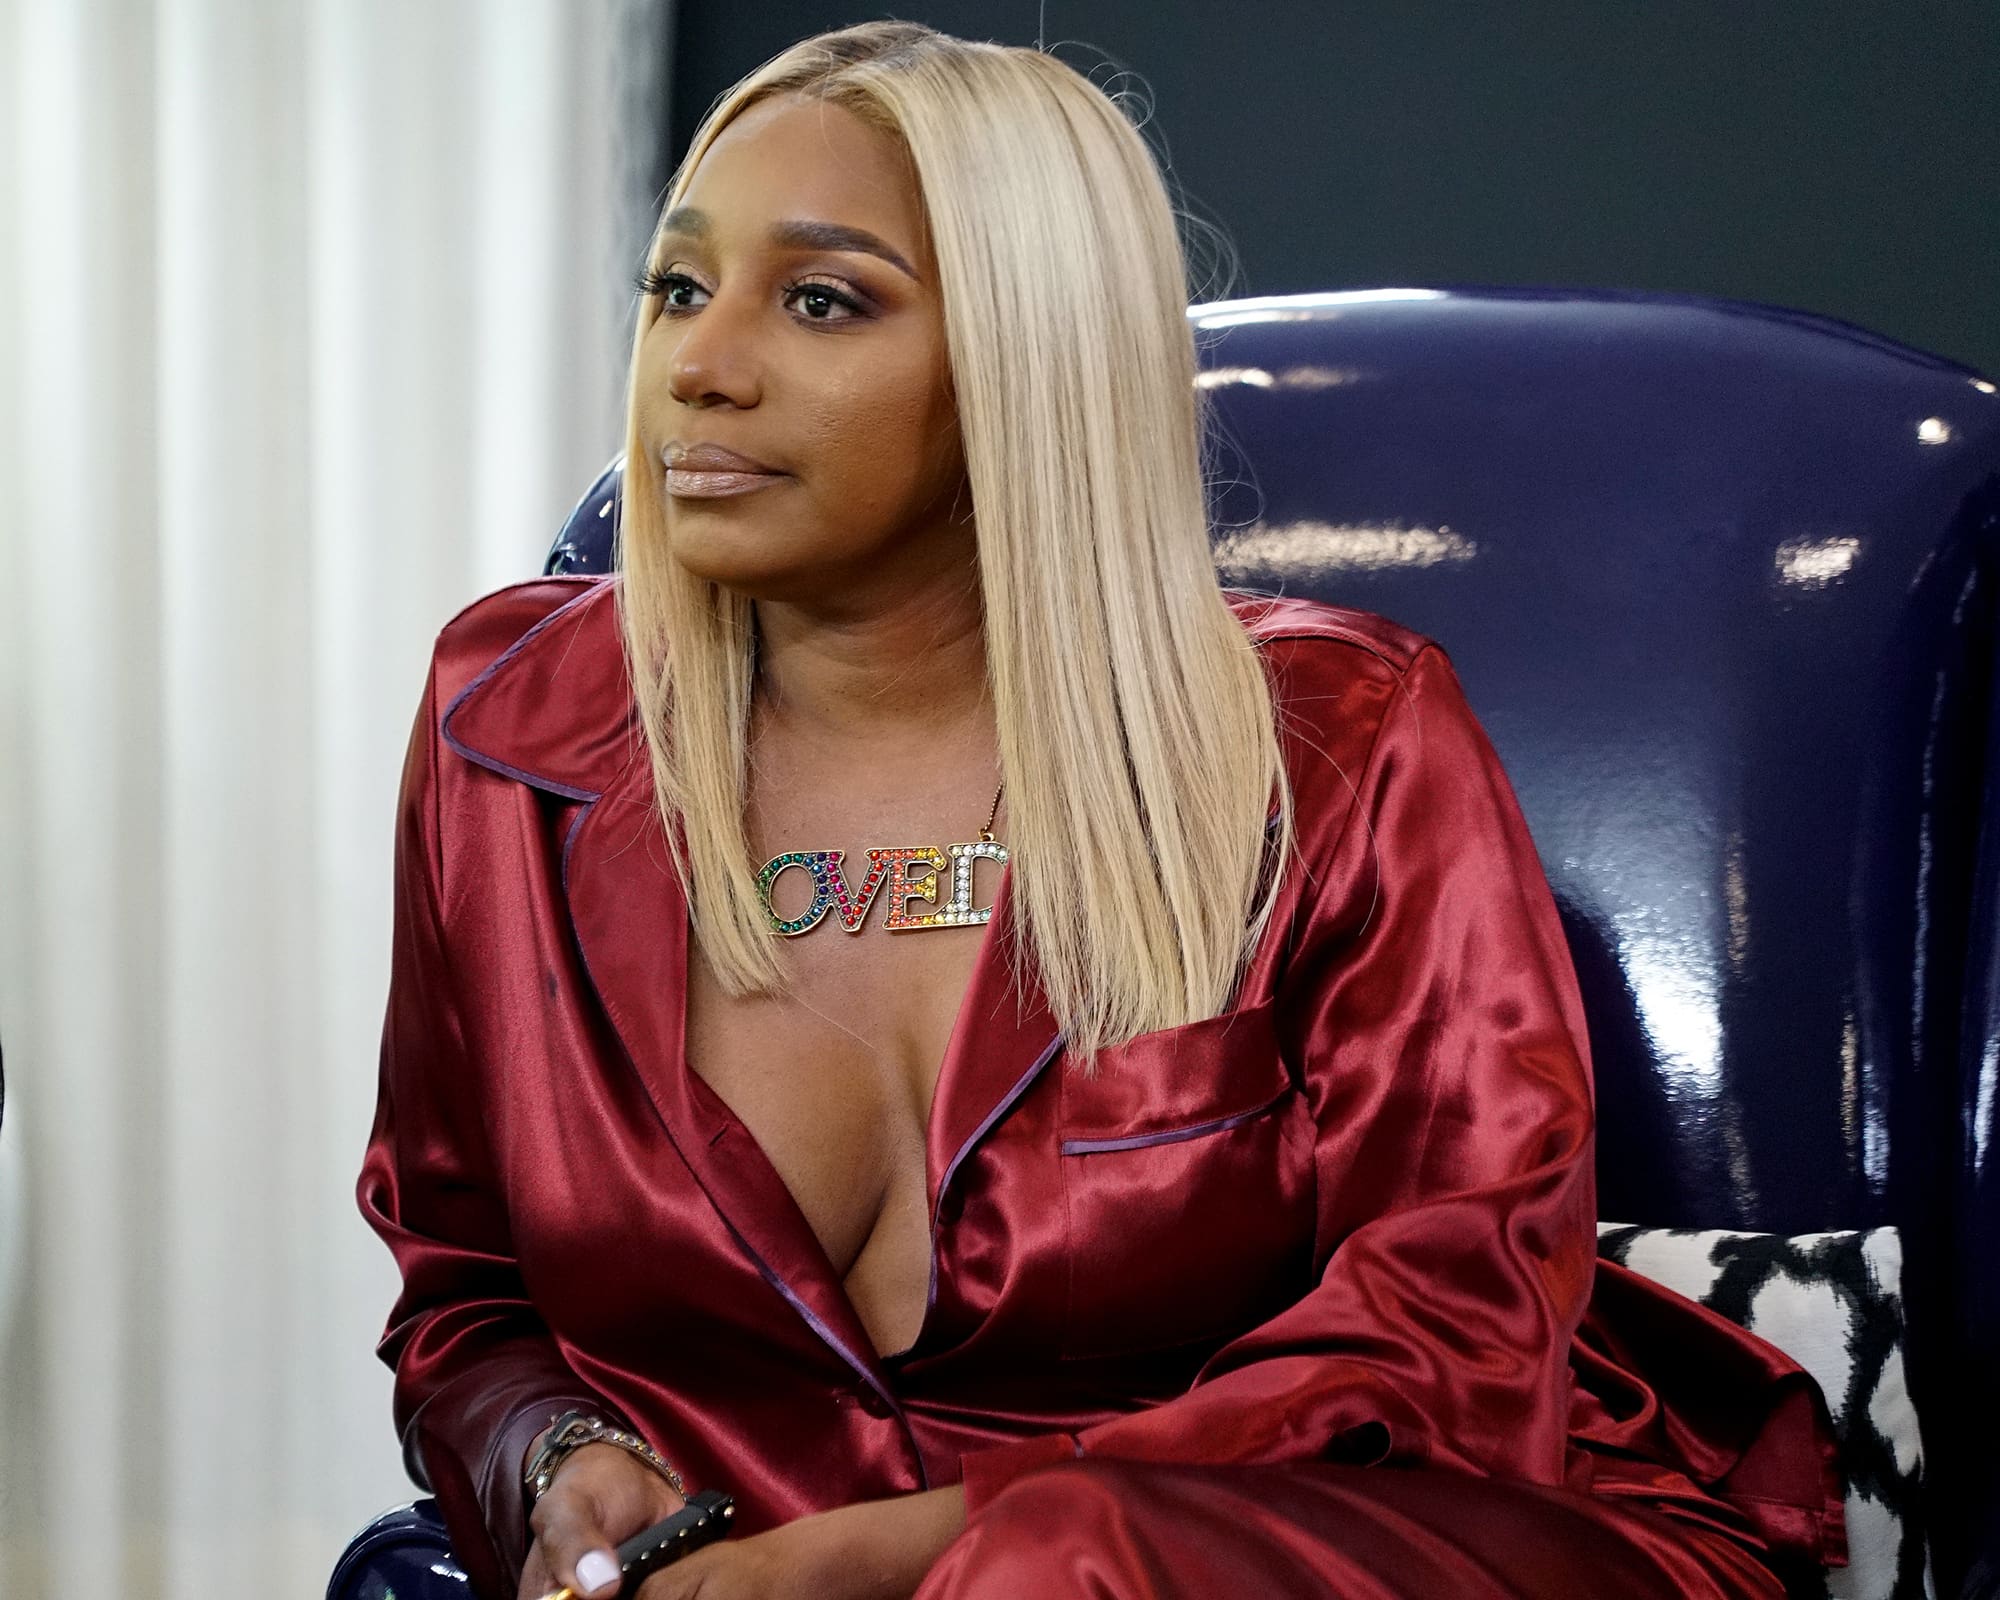 NeNe Leakes Posts A Jaw-Dropping Photo For Her Birthday In Which She's Showing Off A Lot Of Skin And Fans Say She Looks Like A Playboy Bunny From The '70s